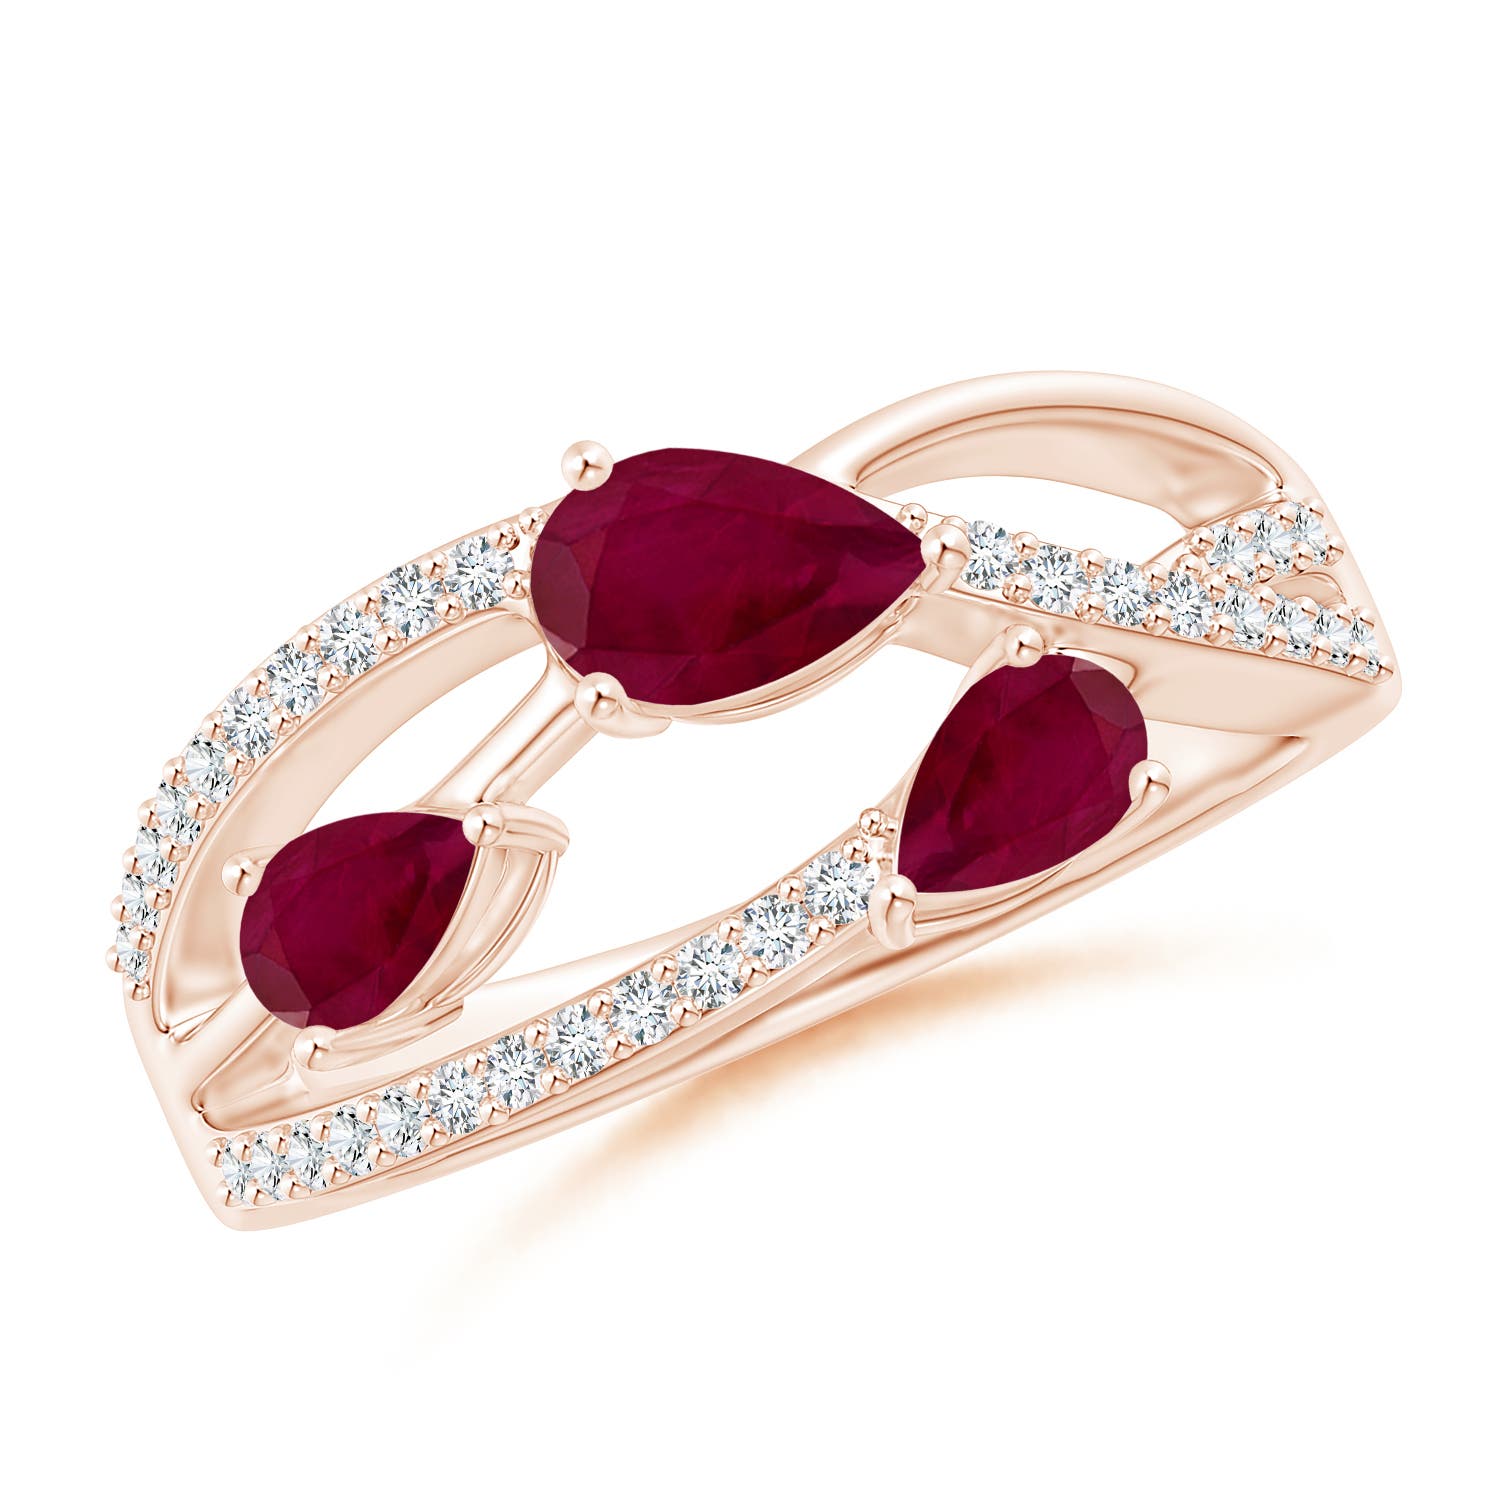 A - Ruby / 1.03 CT / 14 KT Rose Gold